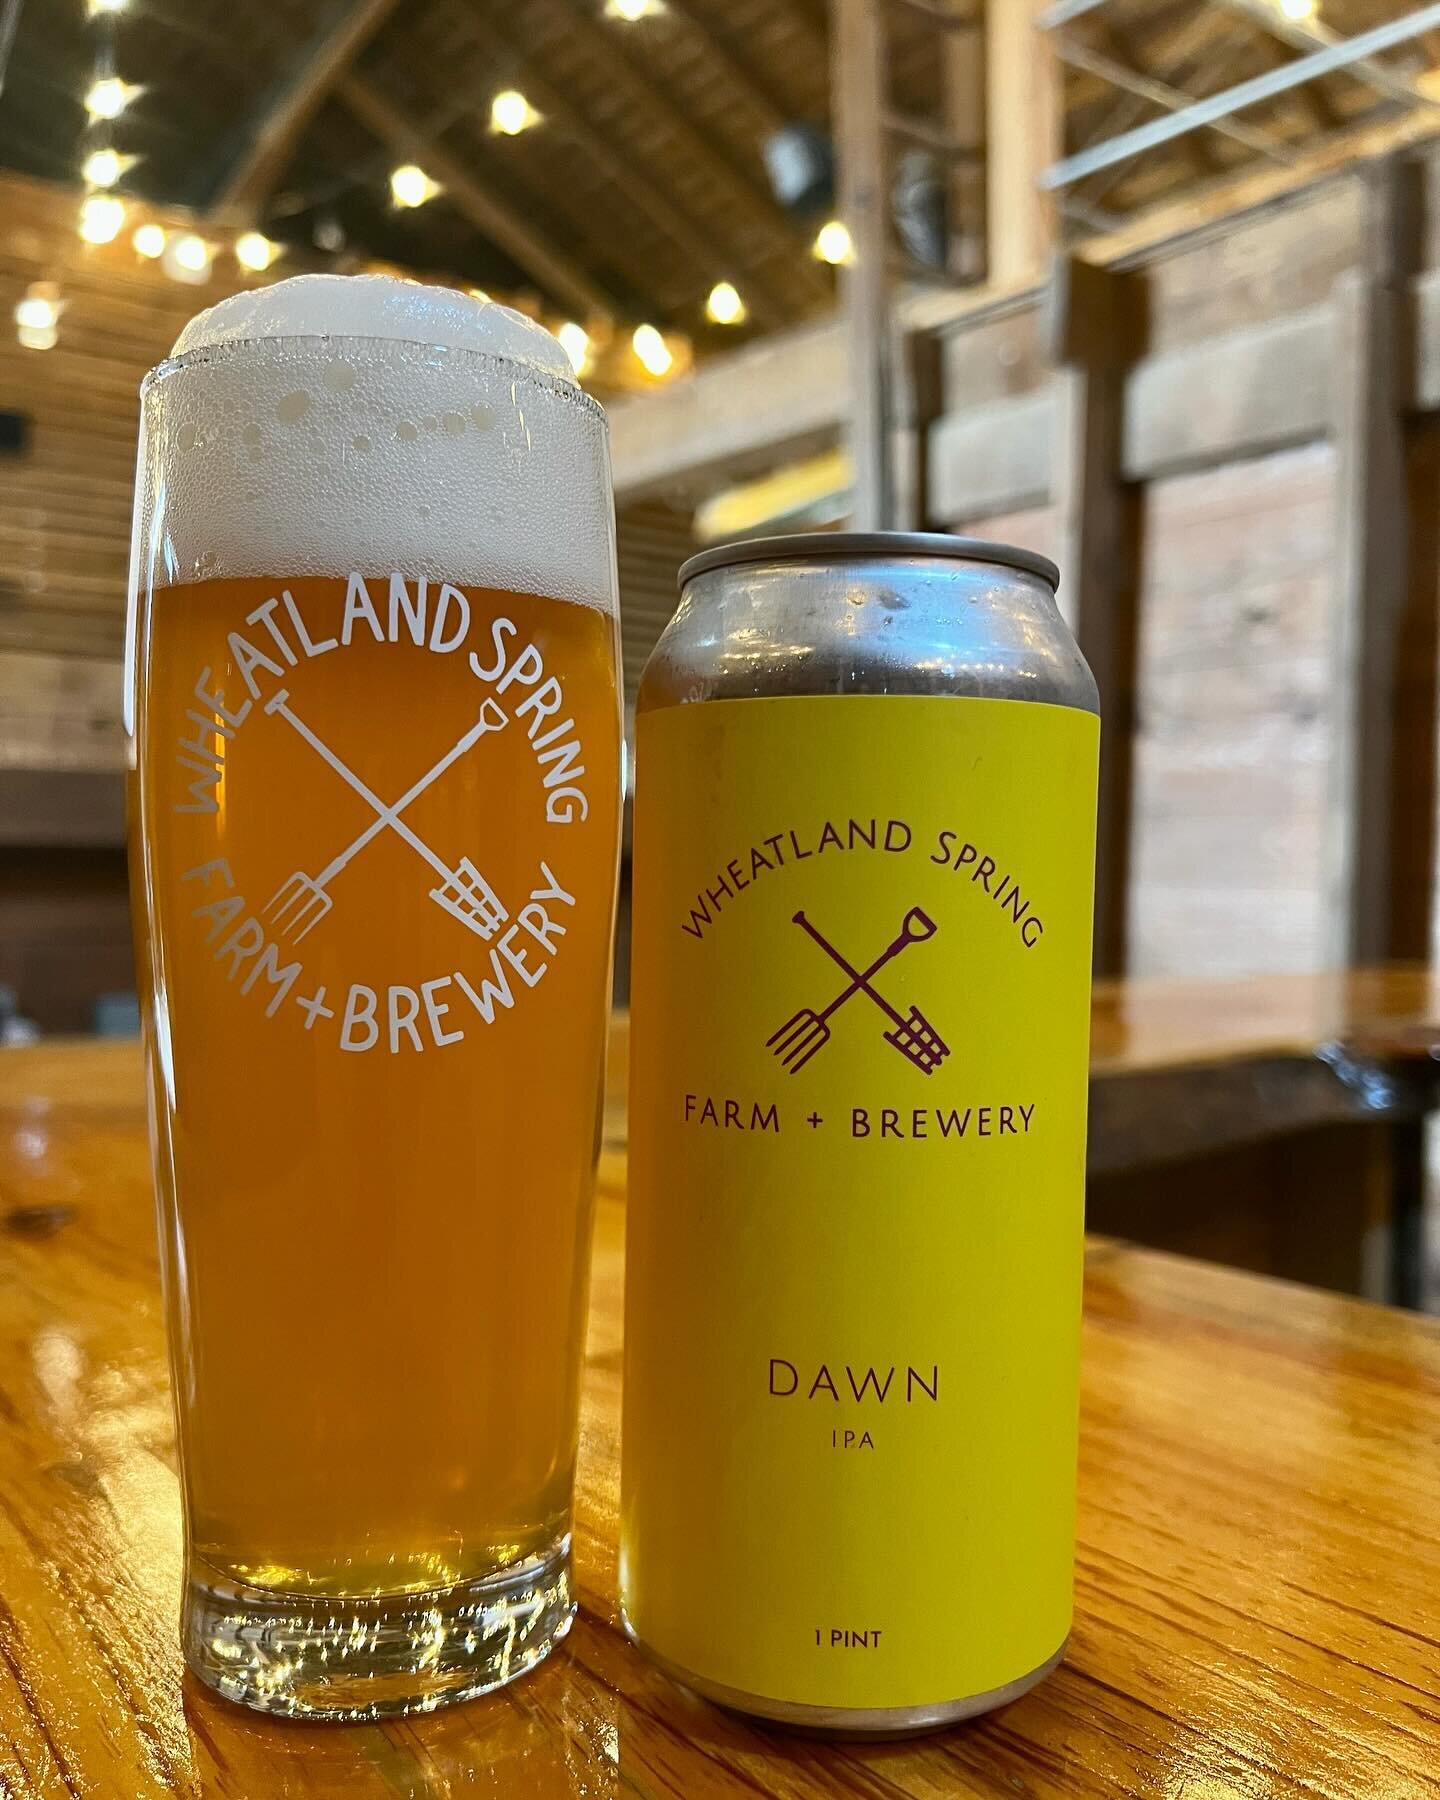 Seems dawn is both foundation and destination. 

DAWN
IPA, 6.8%
Made with all Piedmont grains and New World hops 

Its mix of local malts lays the foundation for firm bitterness, to the delight of balance-seekers who skew west. This cereal constructi